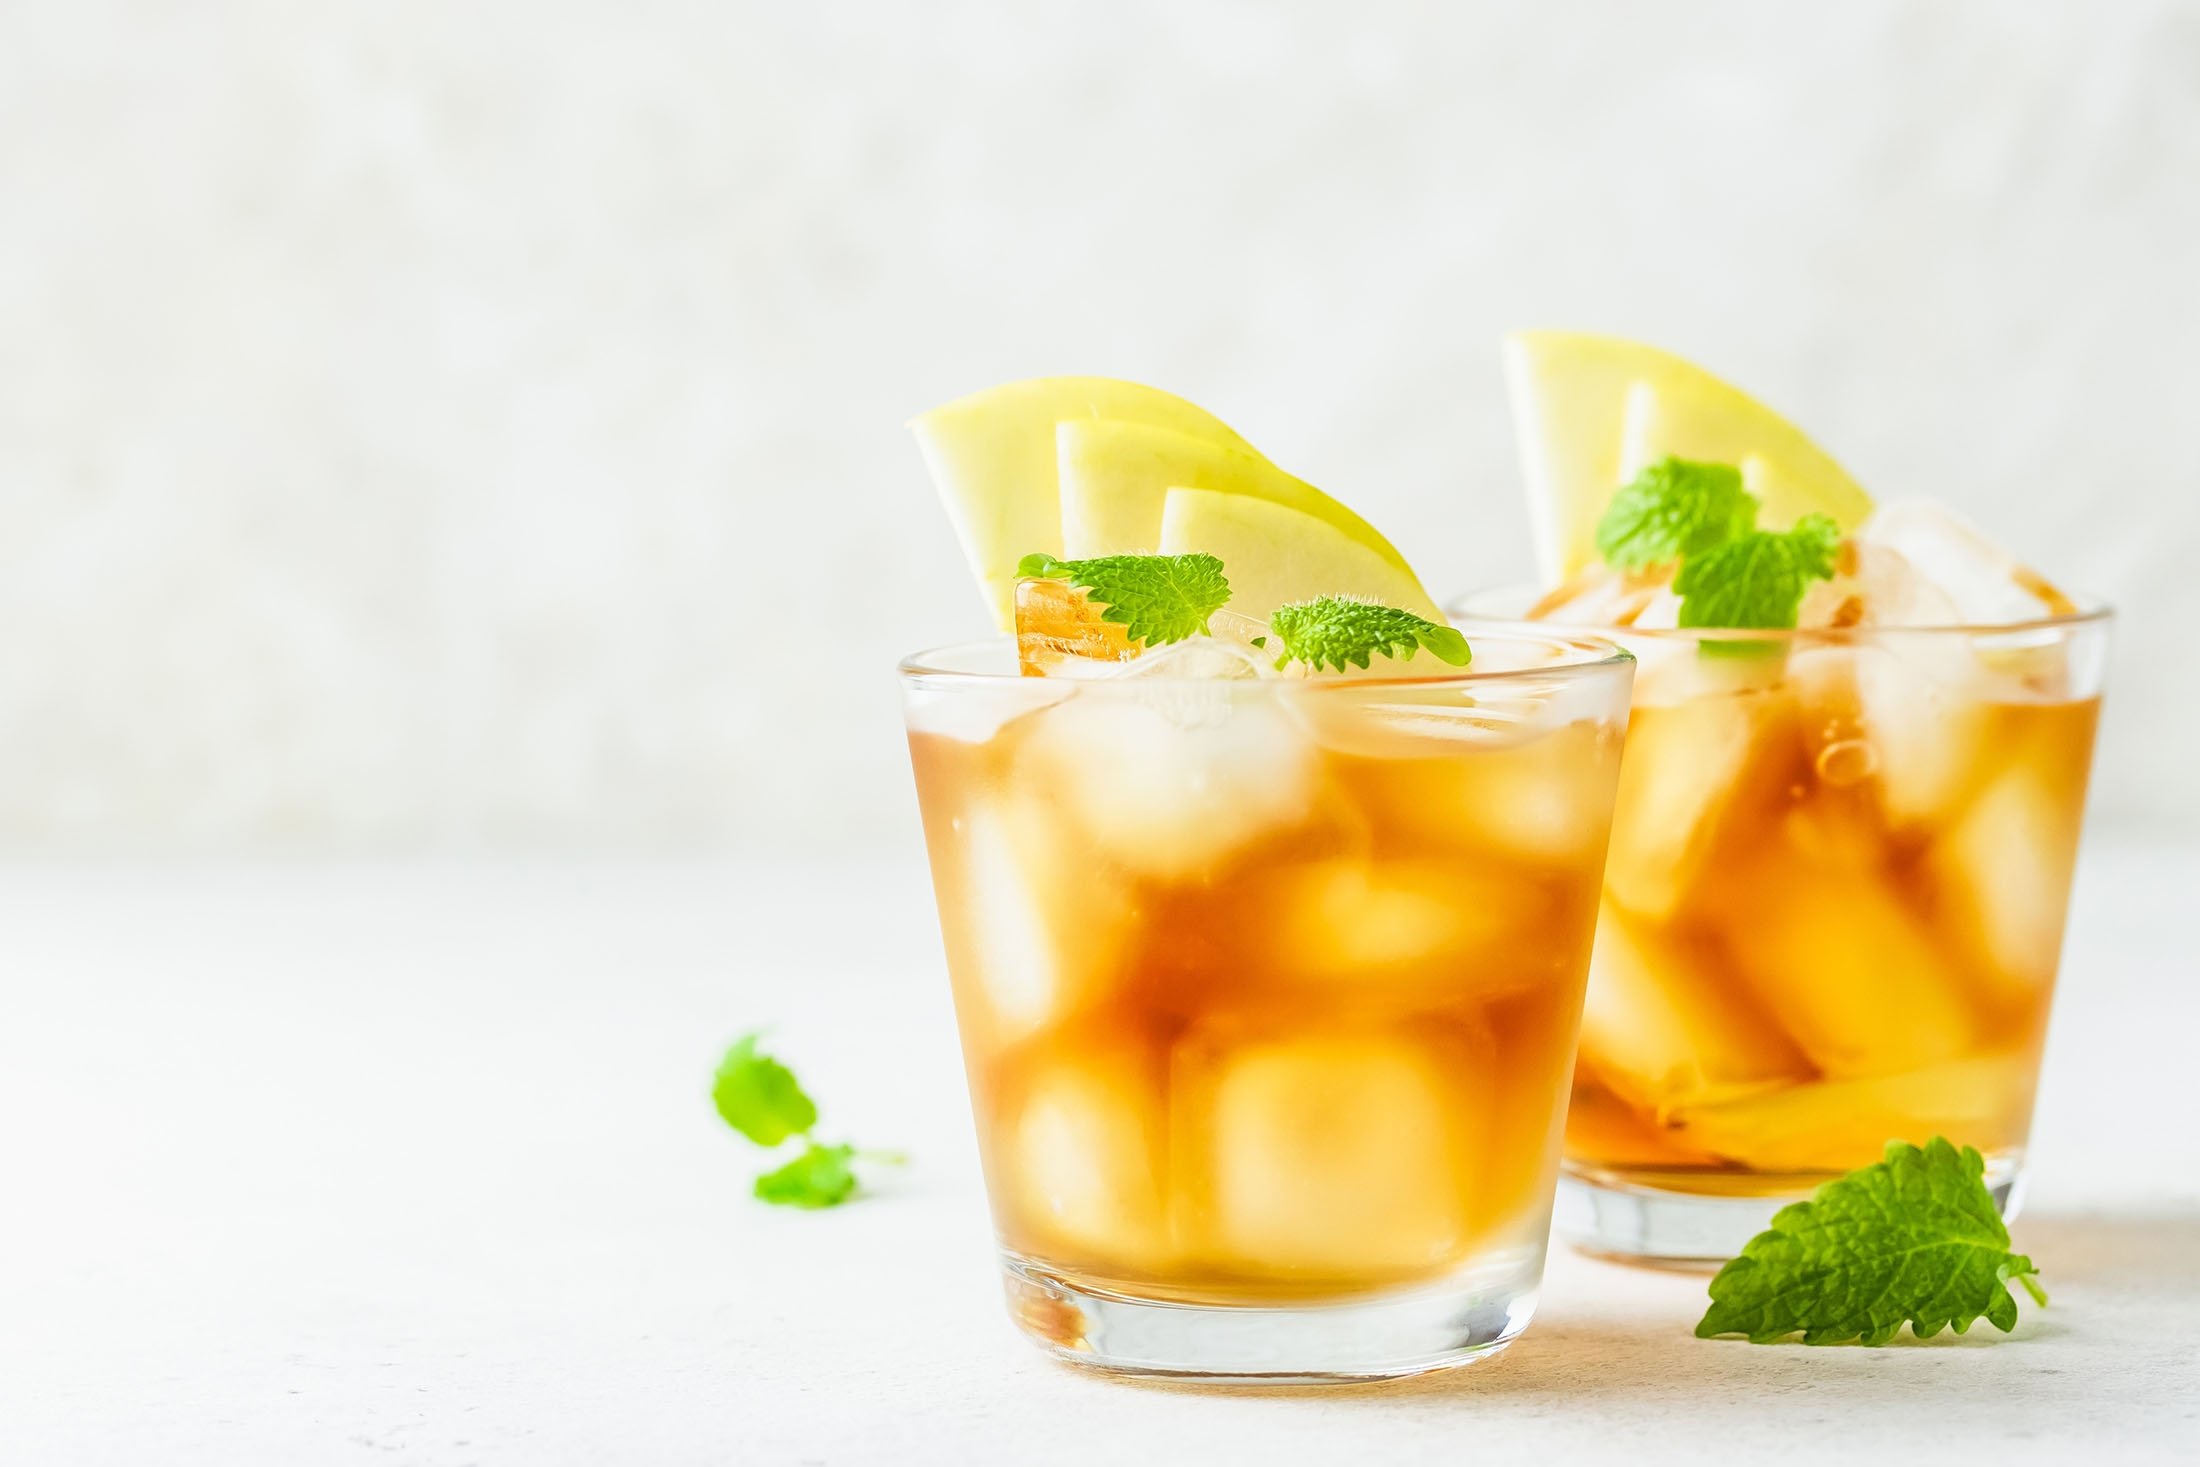 An apple drink with menthol alongside plenty of ice can be incredibly refreshing on a hot summer day. (Shutterstock Photo)